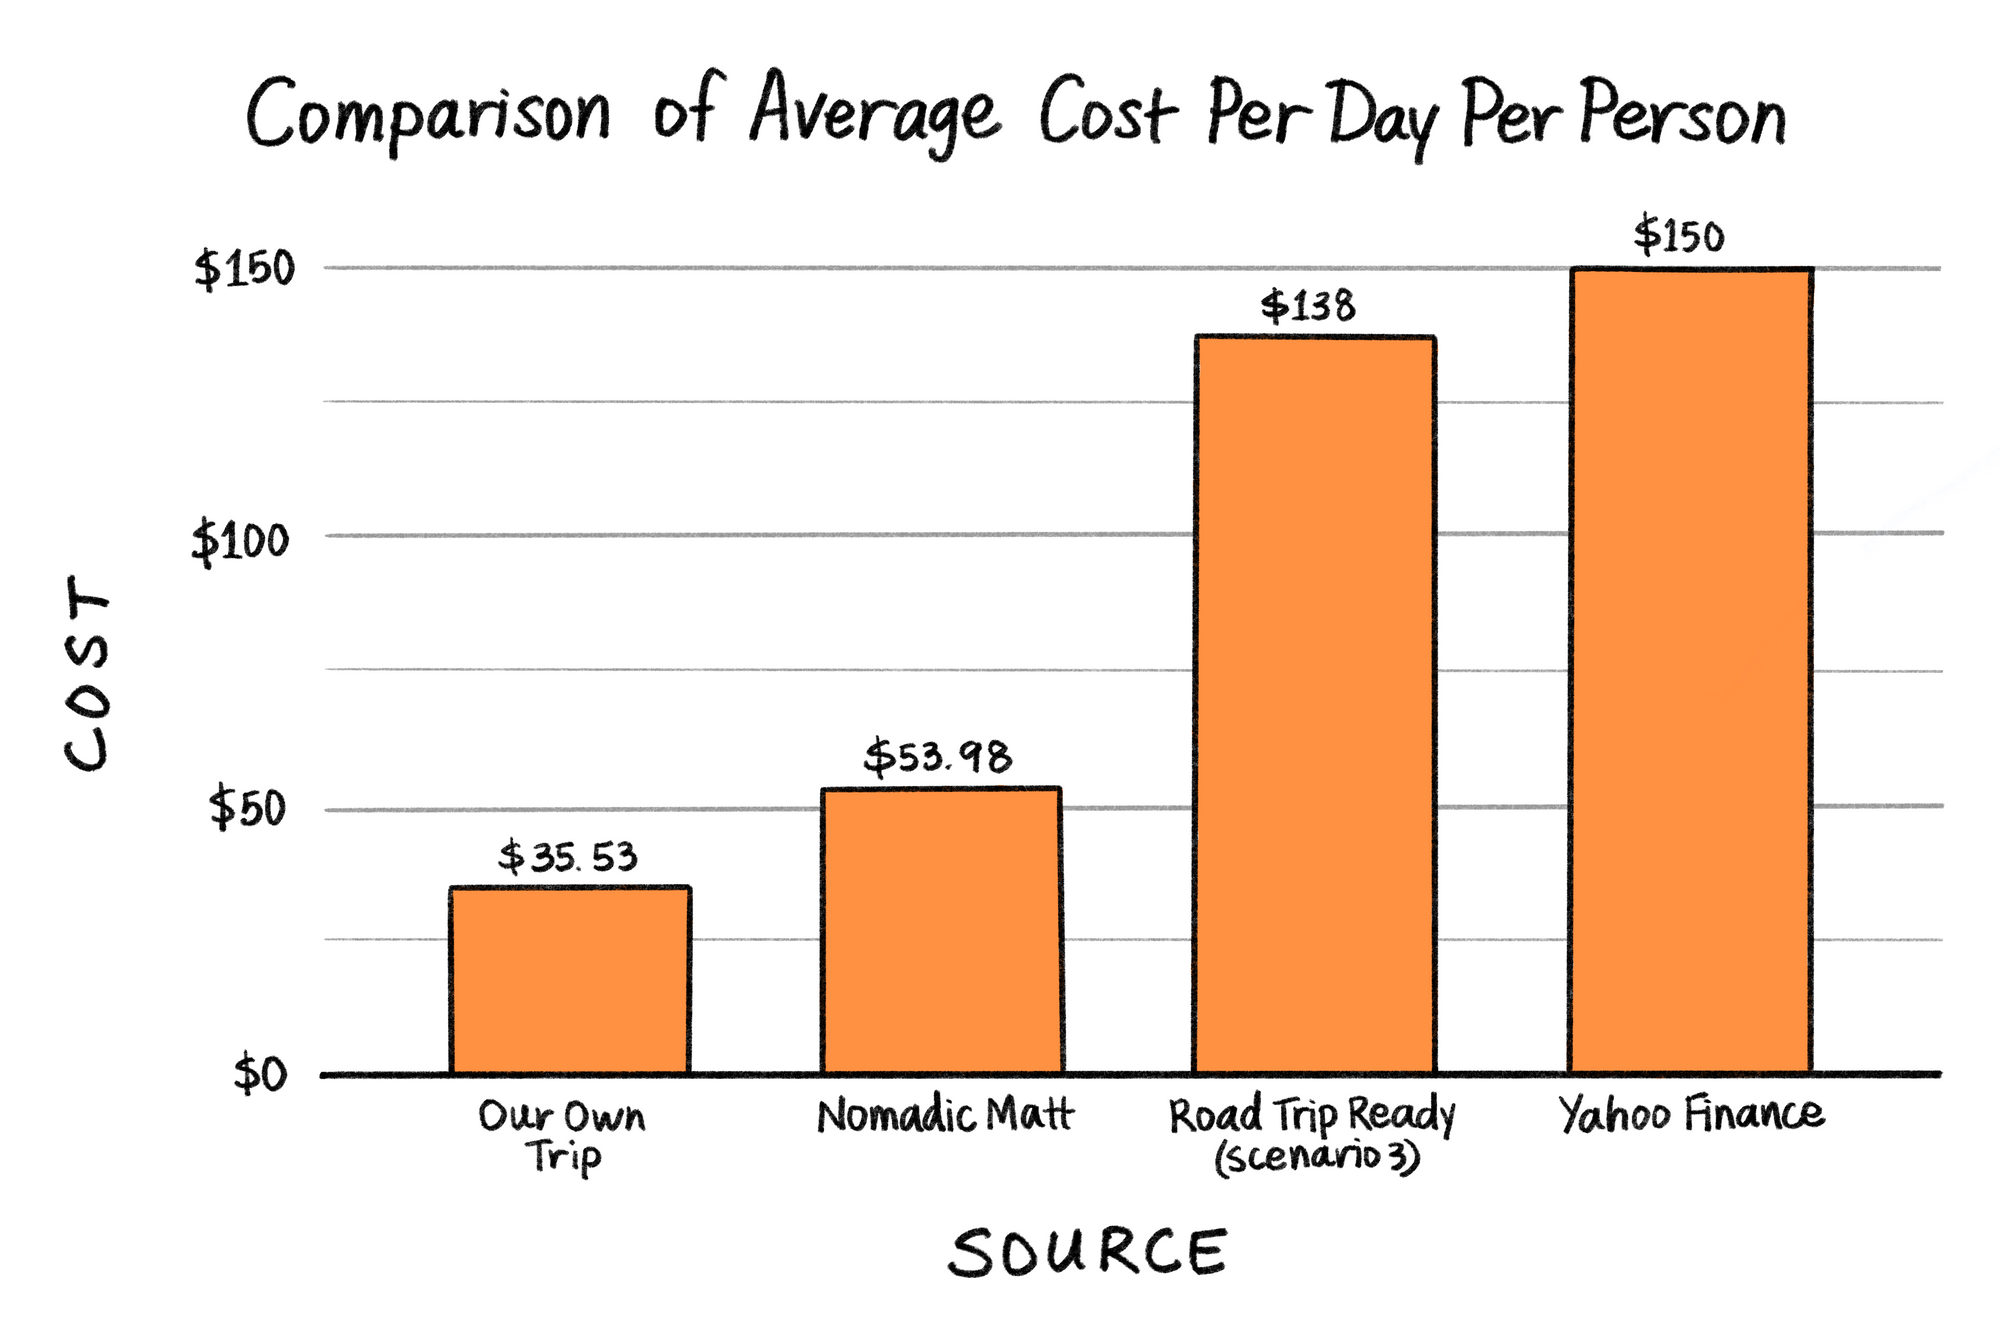 Bar graph of our average cost per day per person compared to, Nomadic Matt, Road Trip Ready, Yahoo Finance